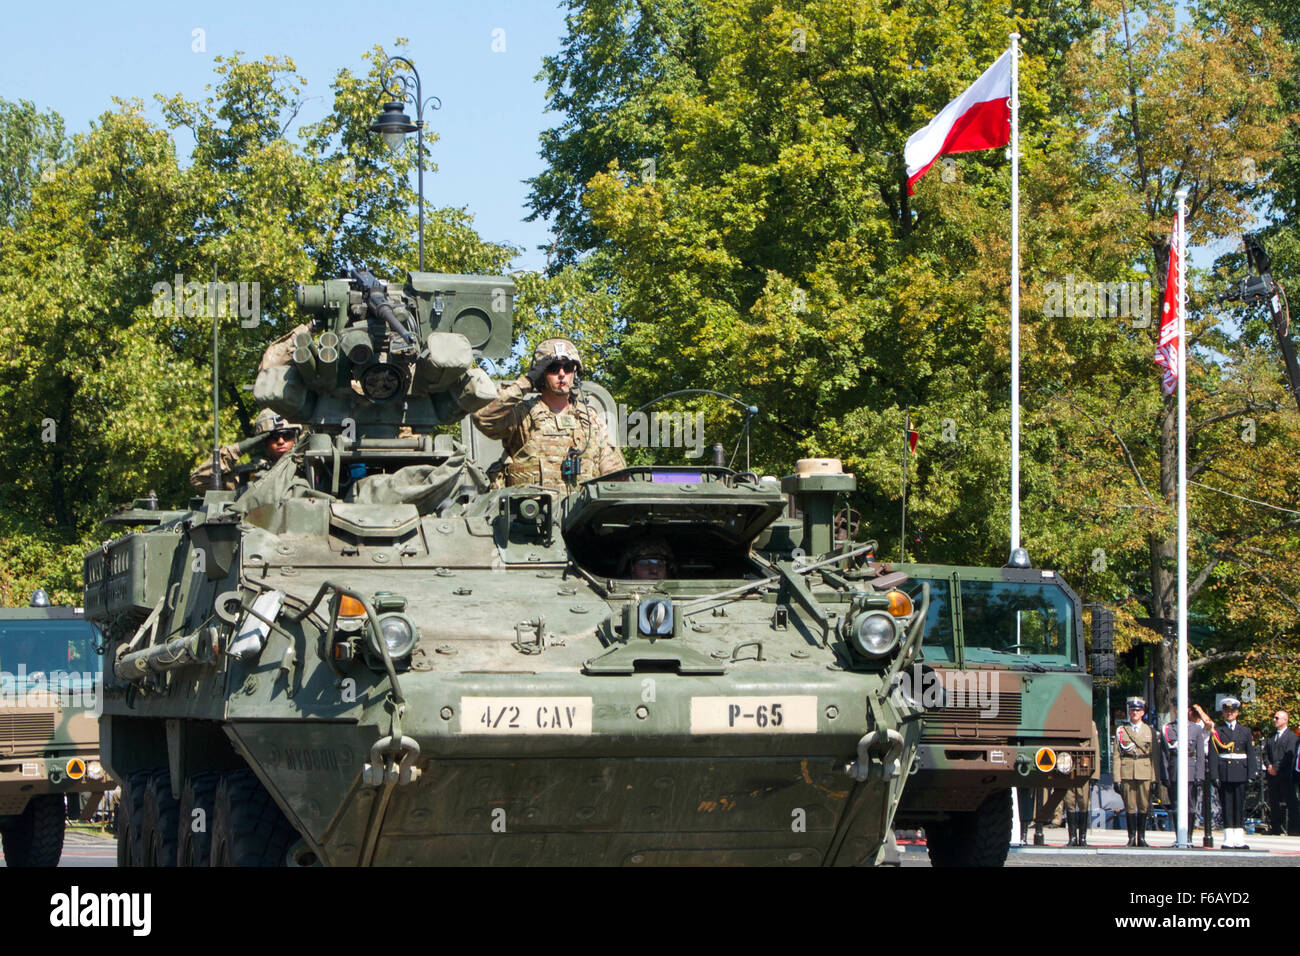 U.S. Soldiers with Papa Troop, 4th Squadron, 2nd Cavalry Regiment operate Stryker vehicles in the Polish Armed Forces Day Parade during Operation Atlantic Resolve, in Warsaw, Poland, Aug. 15, 2015. The U.S. and partner nations conducted land, sea and air exercises and maintained a rotational presence in order to reinforce NATO security commitments in Europe.   (U.S. Army photo by Spc. Marcus Floyd/Released) Stock Photo